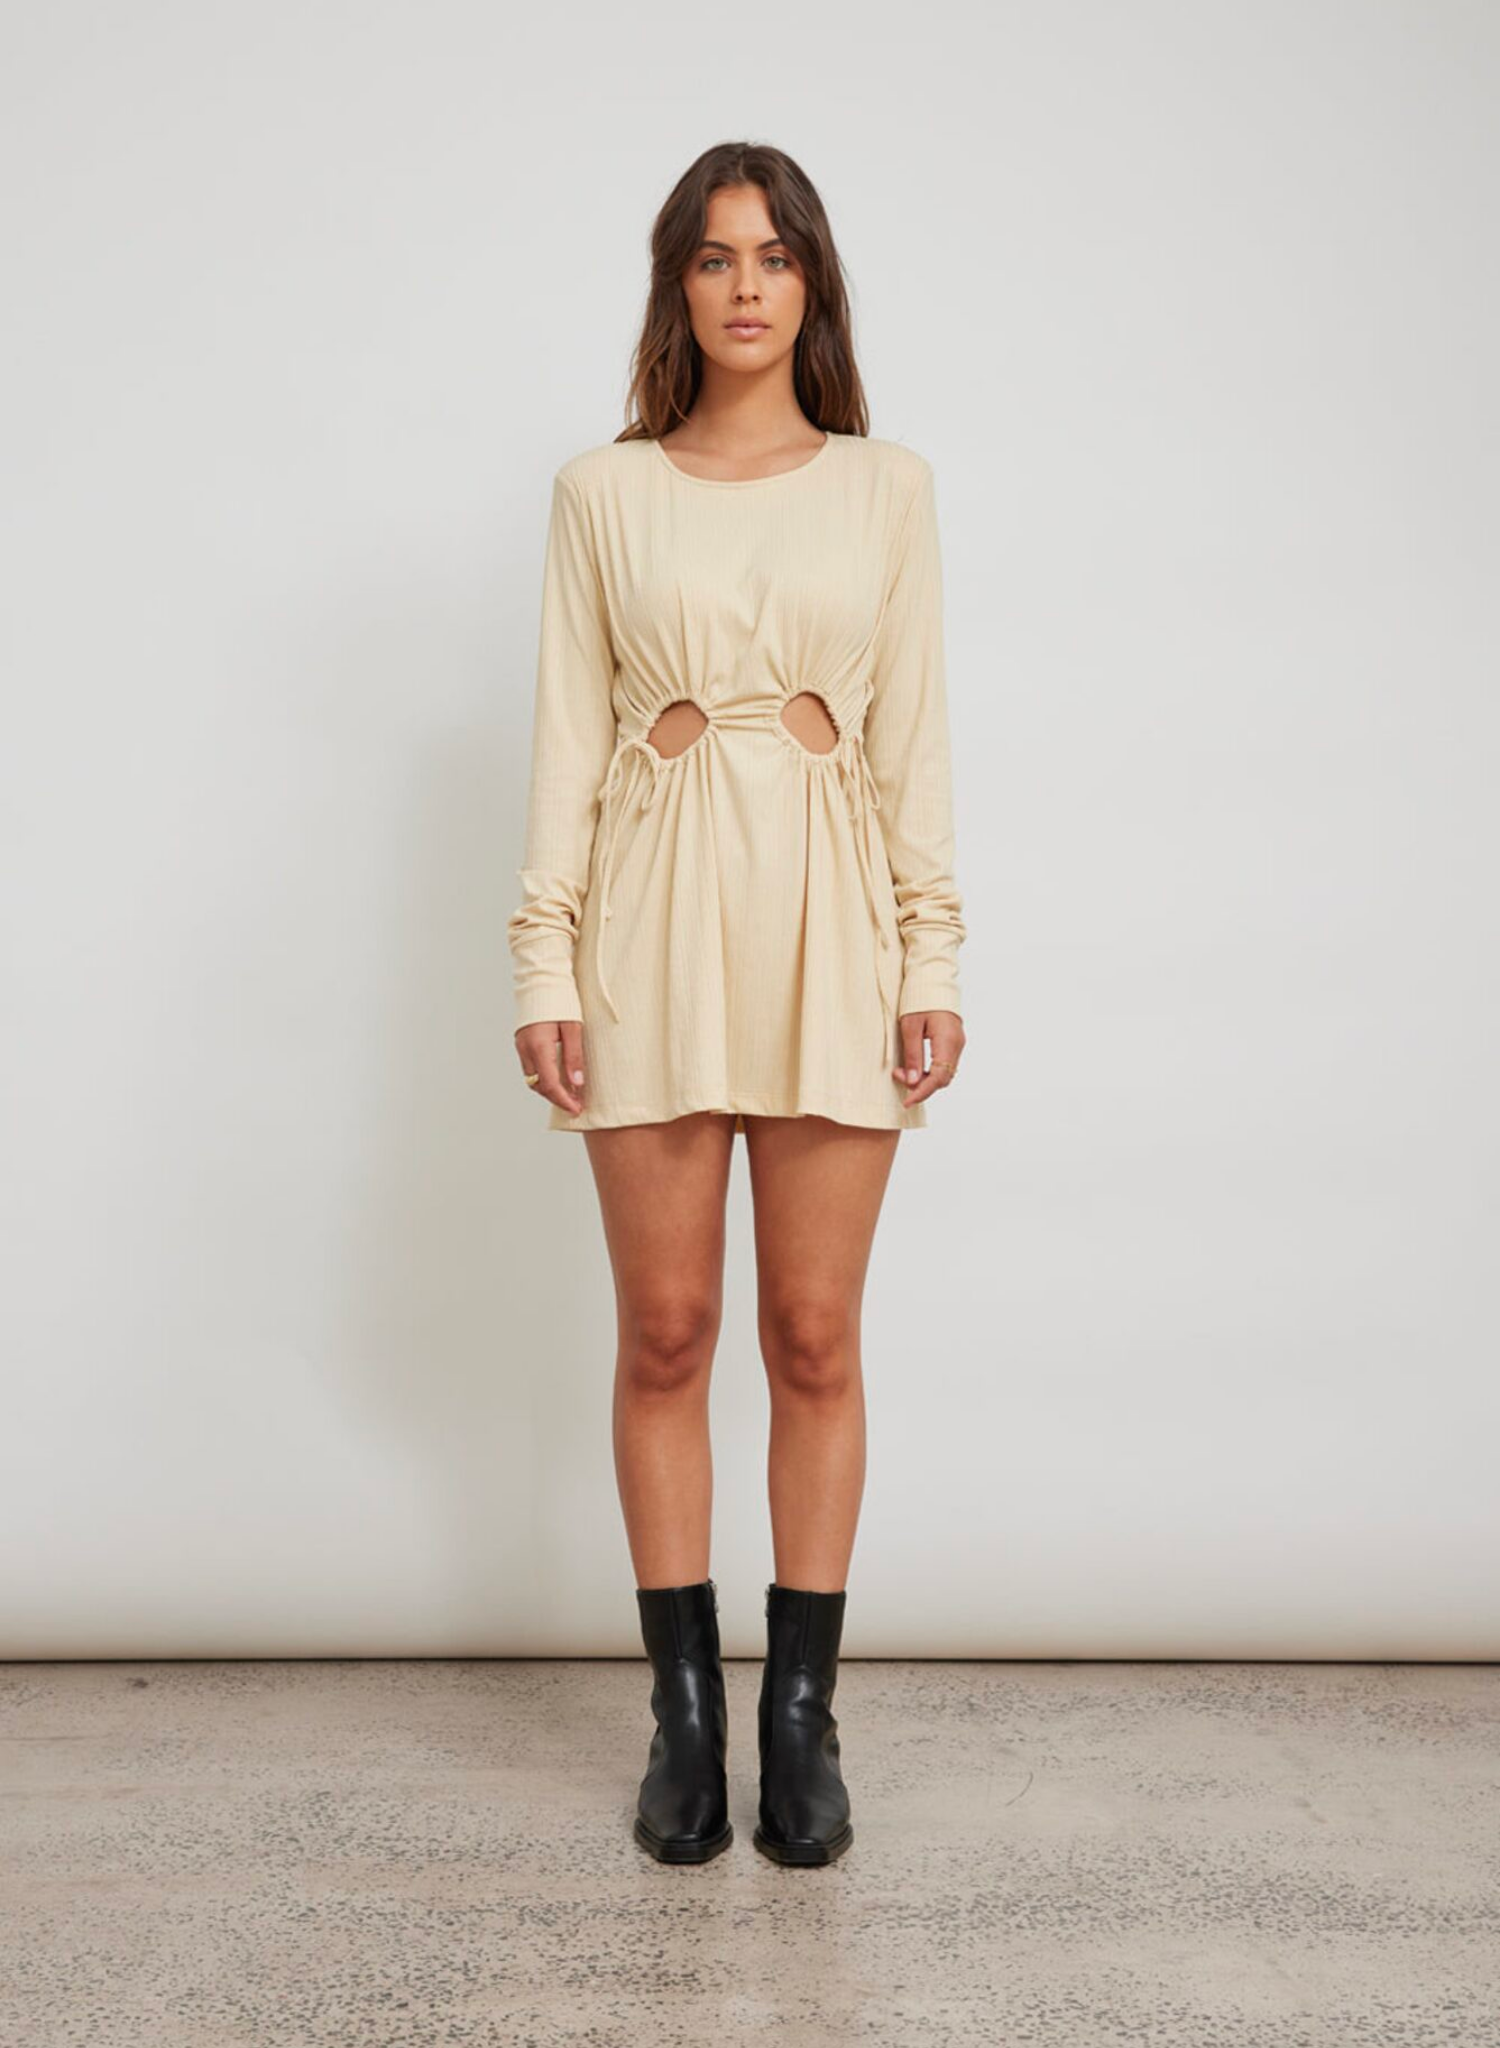 Long sleeve mini dress Mini shoulder pads Double cut out detail at front waist with adjustable drawstrings Soft rubbed jersey fabrication Dress is lined